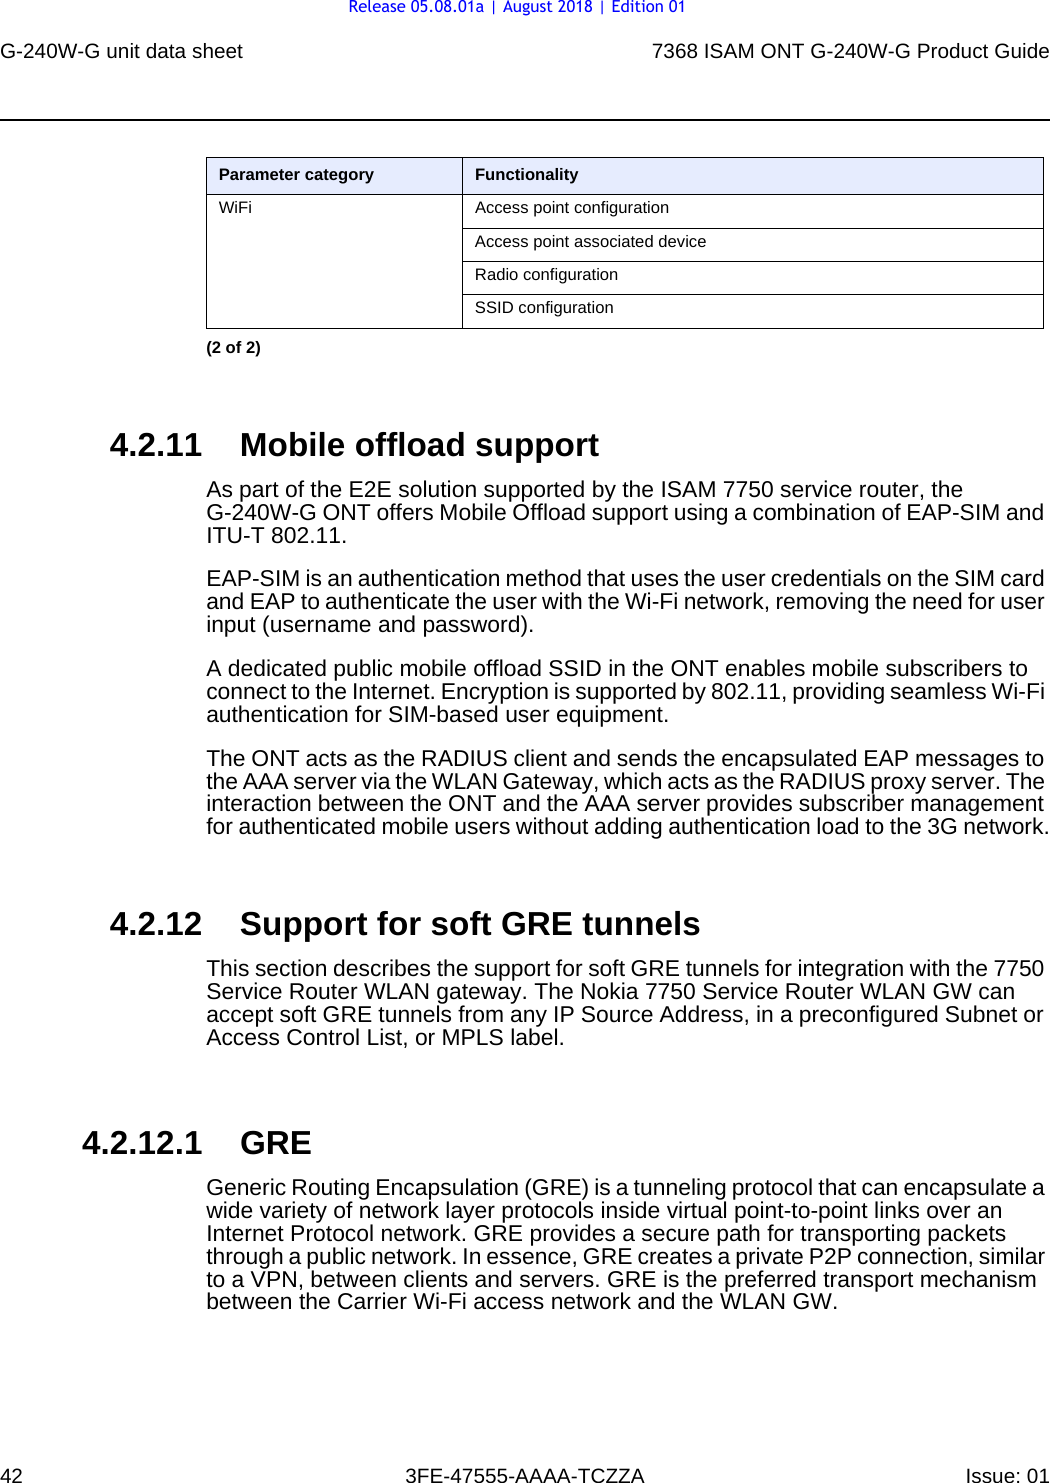 G-240W-G unit data sheet427368 ISAM ONT G-240W-G Product Guide3FE-47555-AAAA-TCZZA Issue: 01 4.2.11 Mobile offload supportAs part of the E2E solution supported by the ISAM 7750 service router, the G-240W-G ONT offers Mobile Offload support using a combination of EAP-SIM and ITU-T 802.11.EAP-SIM is an authentication method that uses the user credentials on the SIM card and EAP to authenticate the user with the Wi-Fi network, removing the need for user input (username and password). A dedicated public mobile offload SSID in the ONT enables mobile subscribers to connect to the Internet. Encryption is supported by 802.11, providing seamless Wi-Fi authentication for SIM-based user equipment.The ONT acts as the RADIUS client and sends the encapsulated EAP messages to the AAA server via the WLAN Gateway, which acts as the RADIUS proxy server. The interaction between the ONT and the AAA server provides subscriber management for authenticated mobile users without adding authentication load to the 3G network.4.2.12 Support for soft GRE tunnelsThis section describes the support for soft GRE tunnels for integration with the 7750 Service Router WLAN gateway. The Nokia 7750 Service Router WLAN GW can accept soft GRE tunnels from any IP Source Address, in a preconfigured Subnet or Access Control List, or MPLS label.4.2.12.1 GREGeneric Routing Encapsulation (GRE) is a tunneling protocol that can encapsulate a wide variety of network layer protocols inside virtual point-to-point links over an Internet Protocol network. GRE provides a secure path for transporting packets through a public network. In essence, GRE creates a private P2P connection, similar to a VPN, between clients and servers. GRE is the preferred transport mechanism between the Carrier Wi-Fi access network and the WLAN GW.WiFi Access point configurationAccess point associated deviceRadio configurationSSID configurationParameter category Functionality(2 of 2)Release 05.08.01a | August 2018 | Edition 01